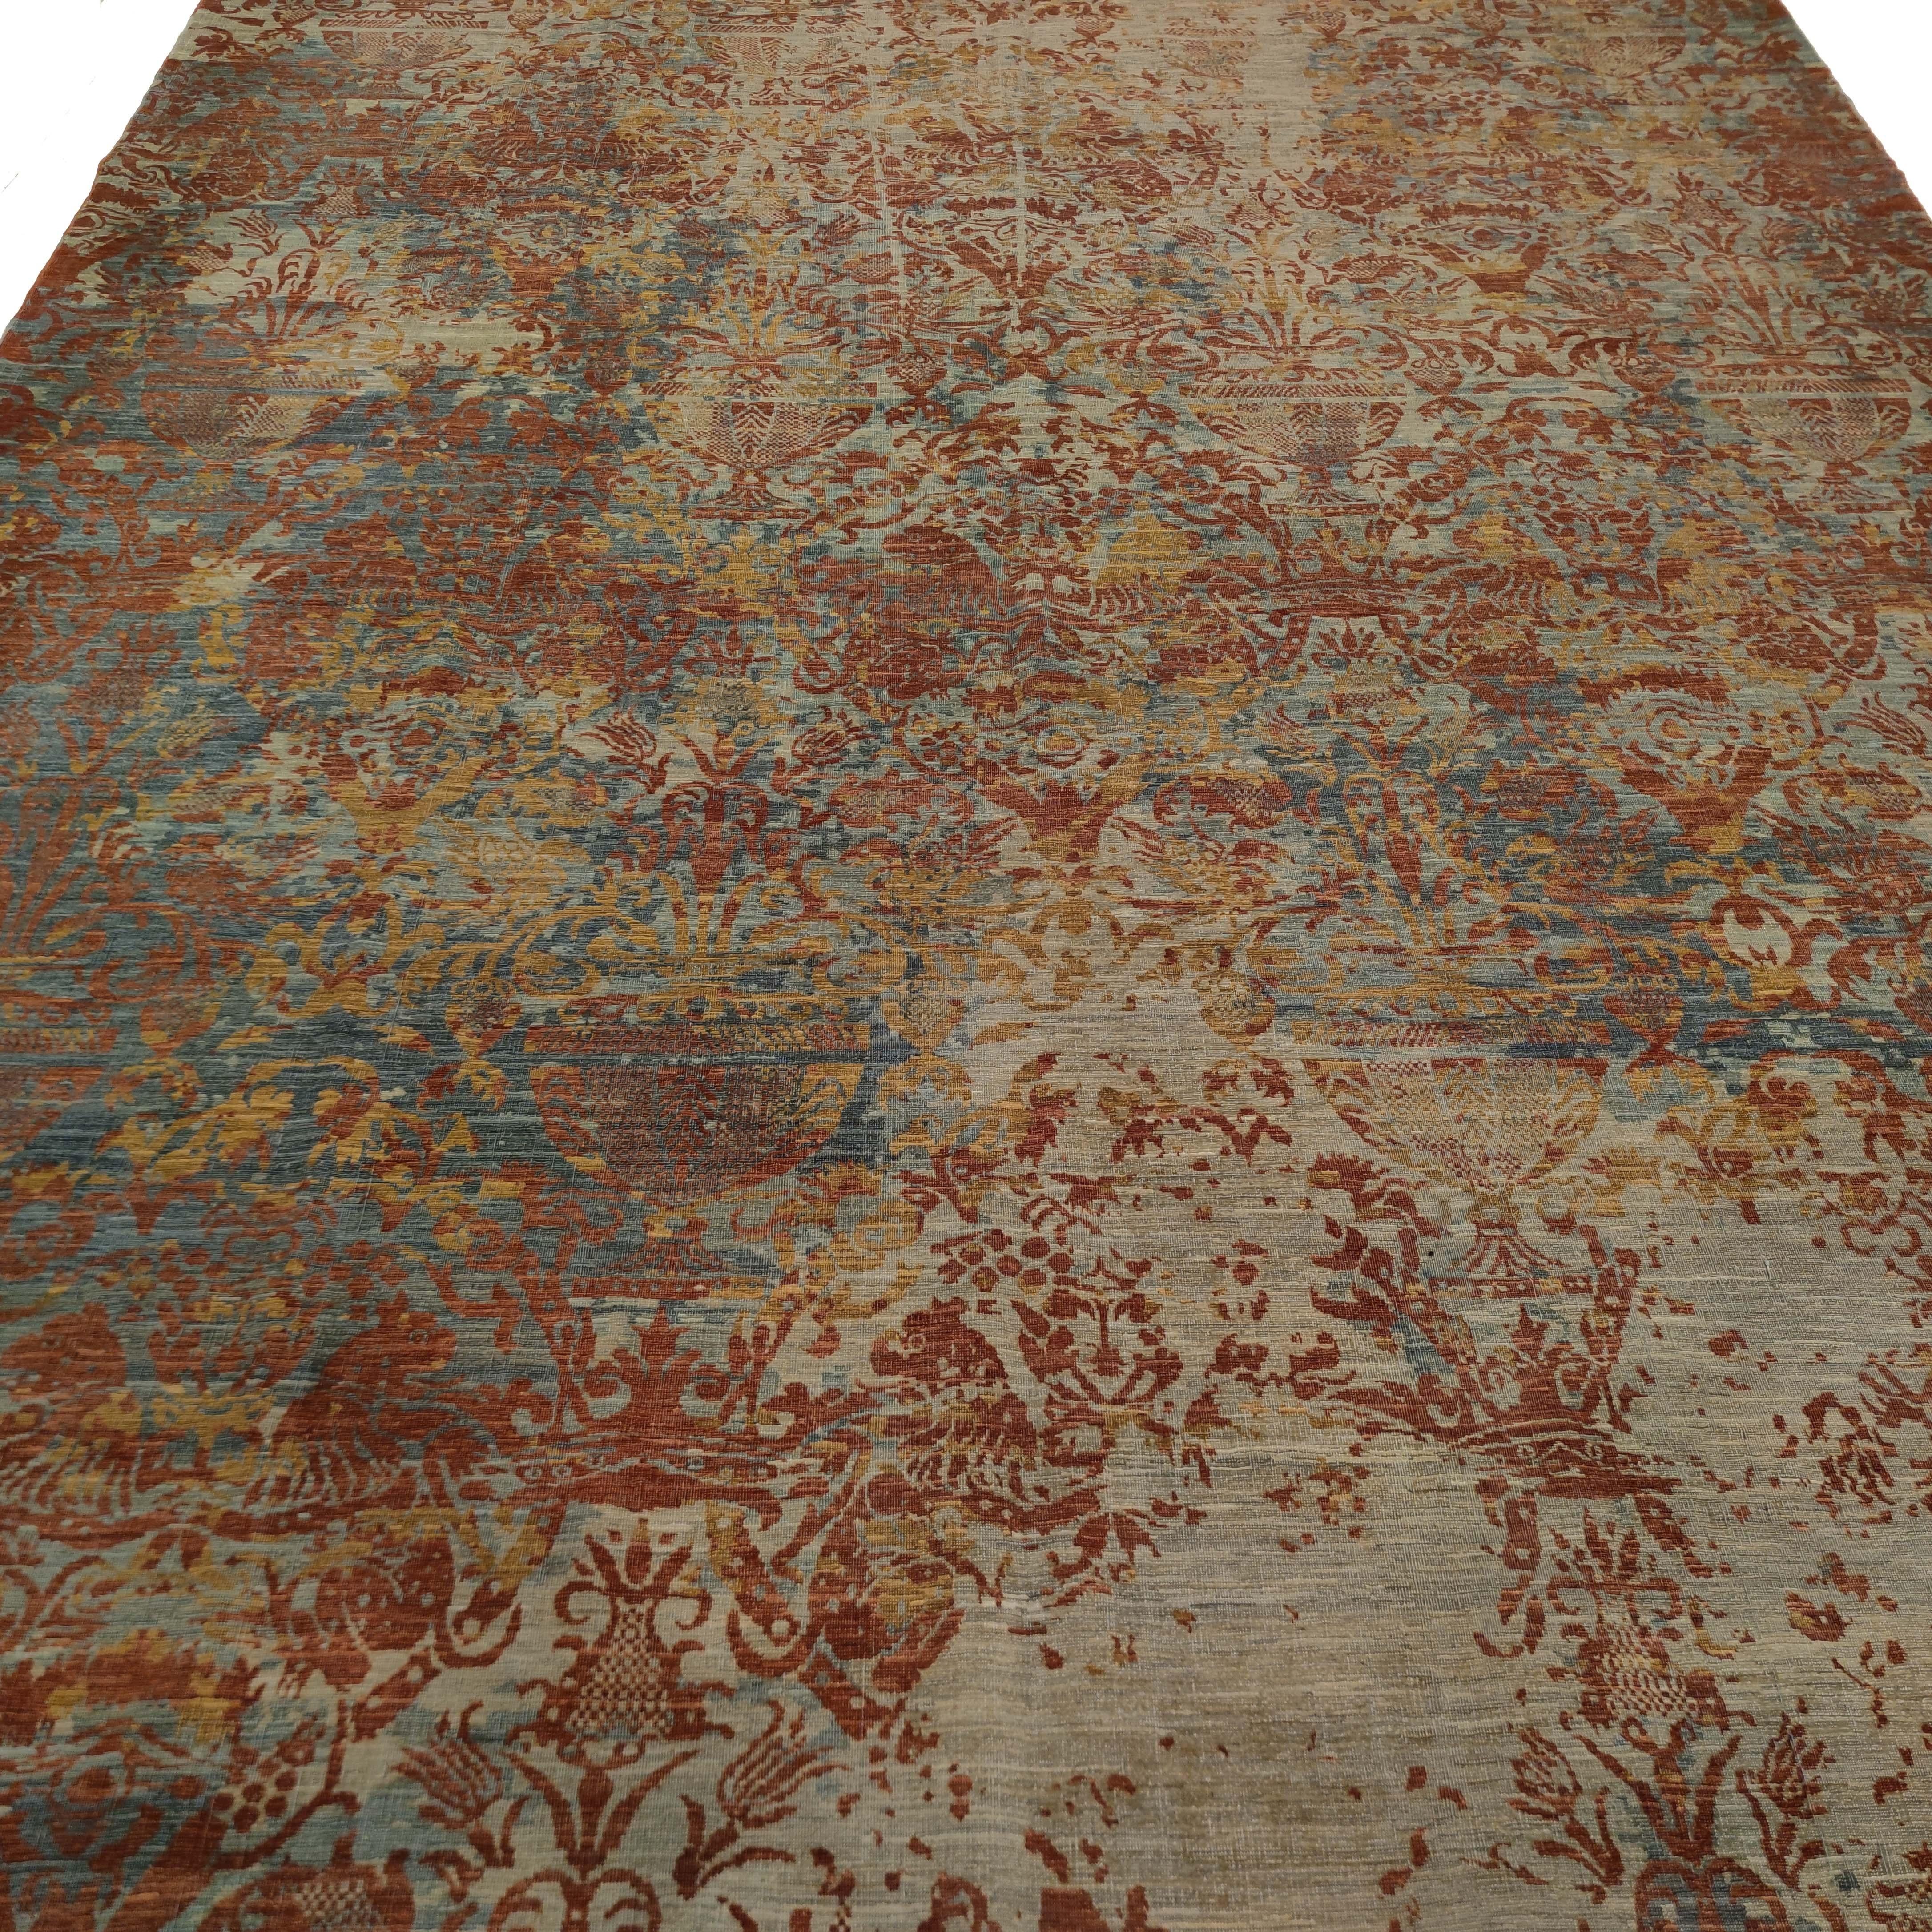 Fabriano is part of that fascinating world of faded-over-time rugs. From traditional to transitional, this look celebrates faded, worn and softened textiles over time. Stunning muted colour schemes and subtle patterning run throughout, creating the